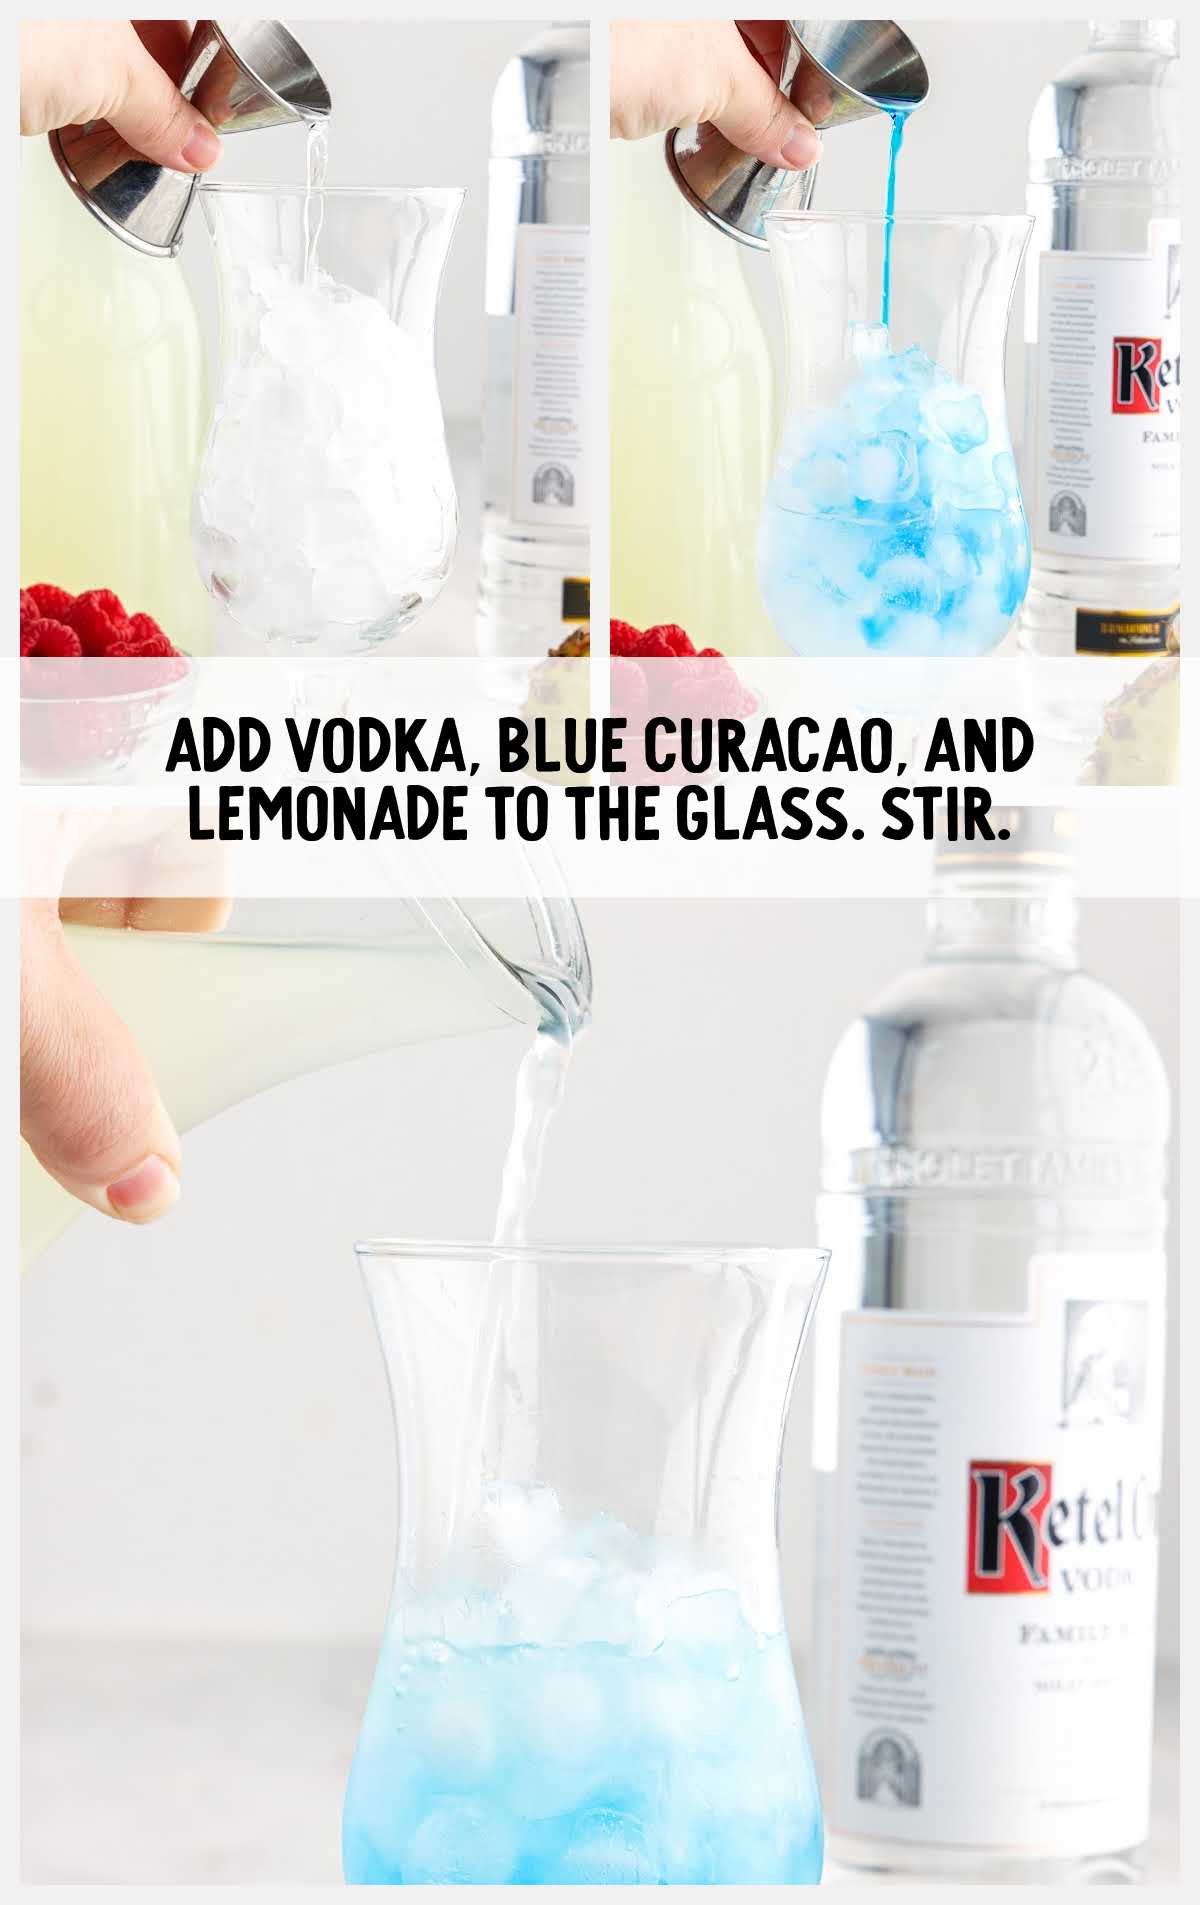 vodka, blue curacao and lemonade added to the tall glass and stirred